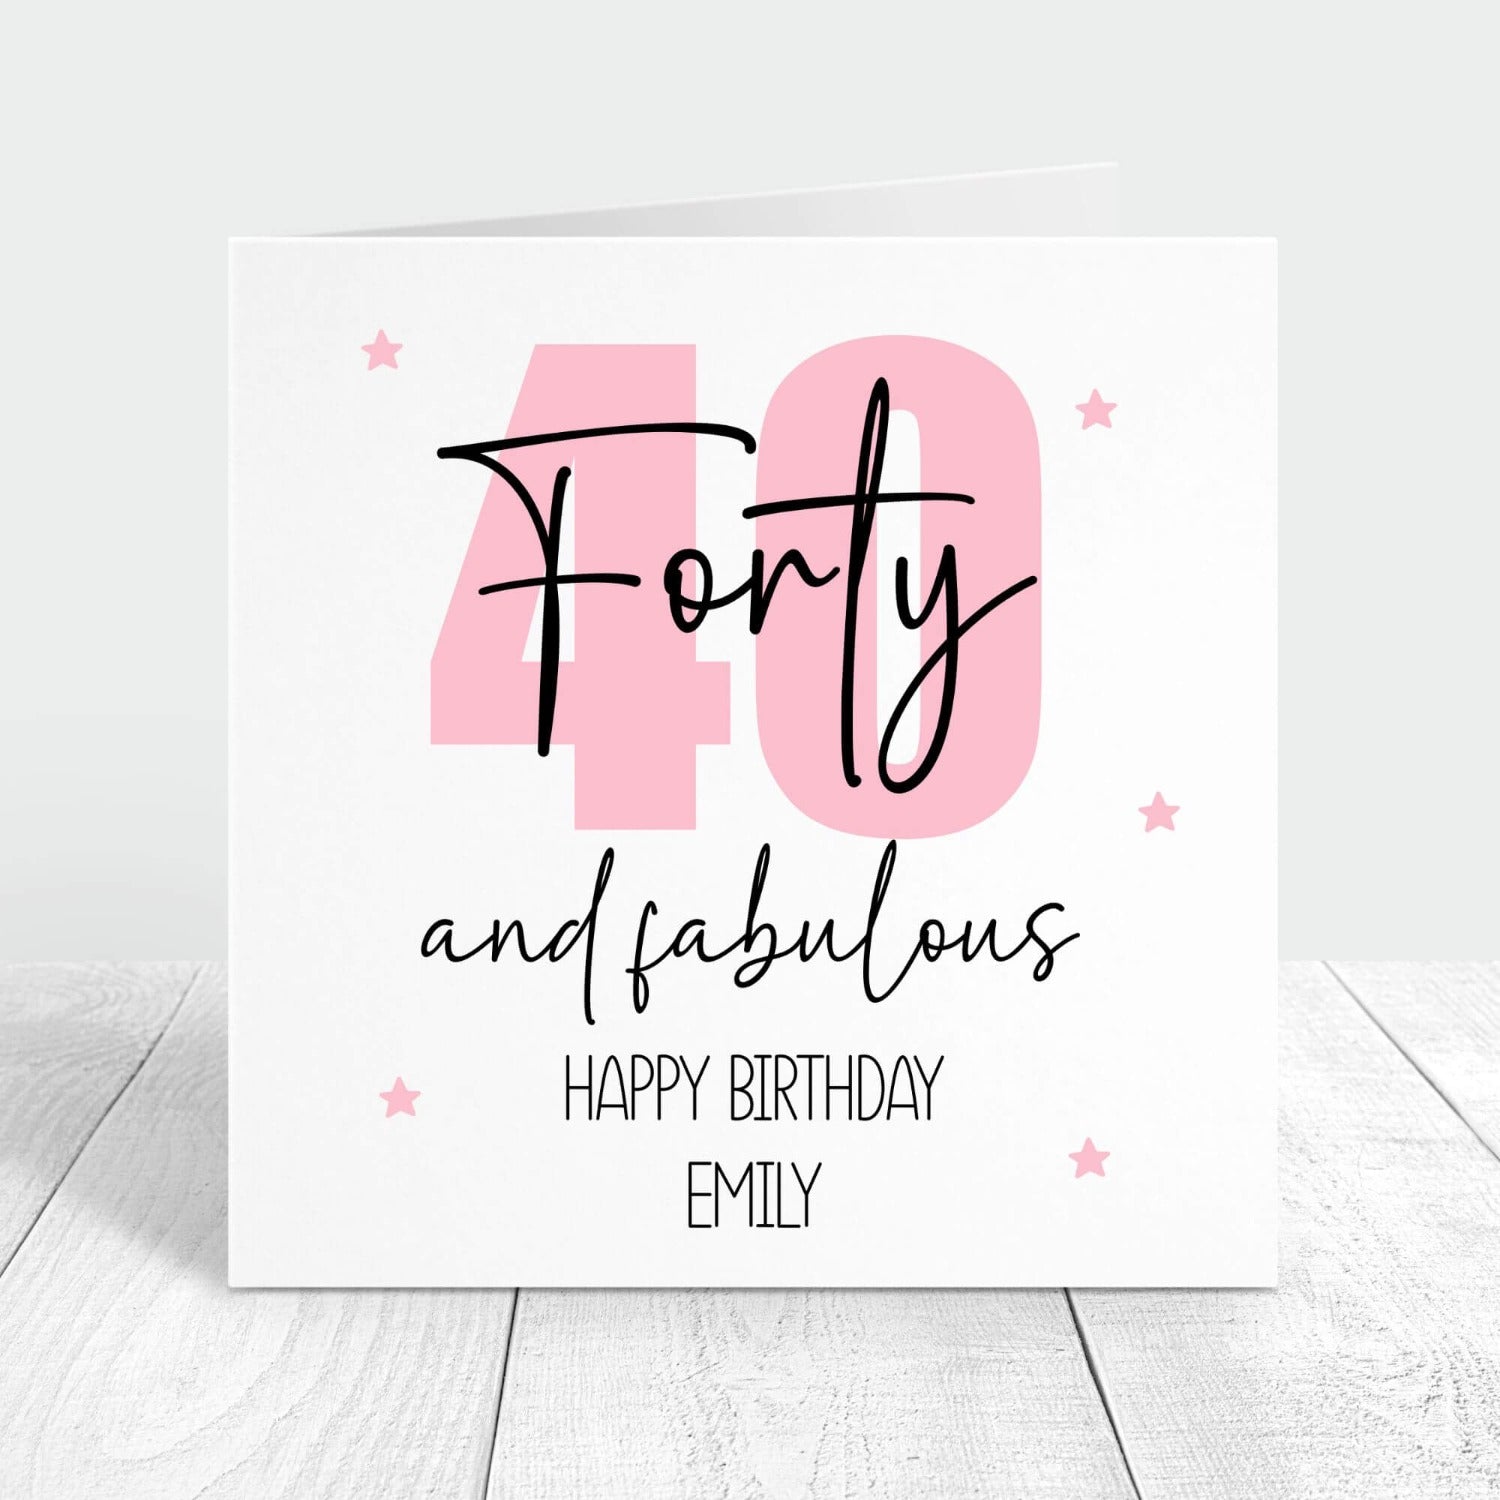 40 and fabulous birthday card personalised